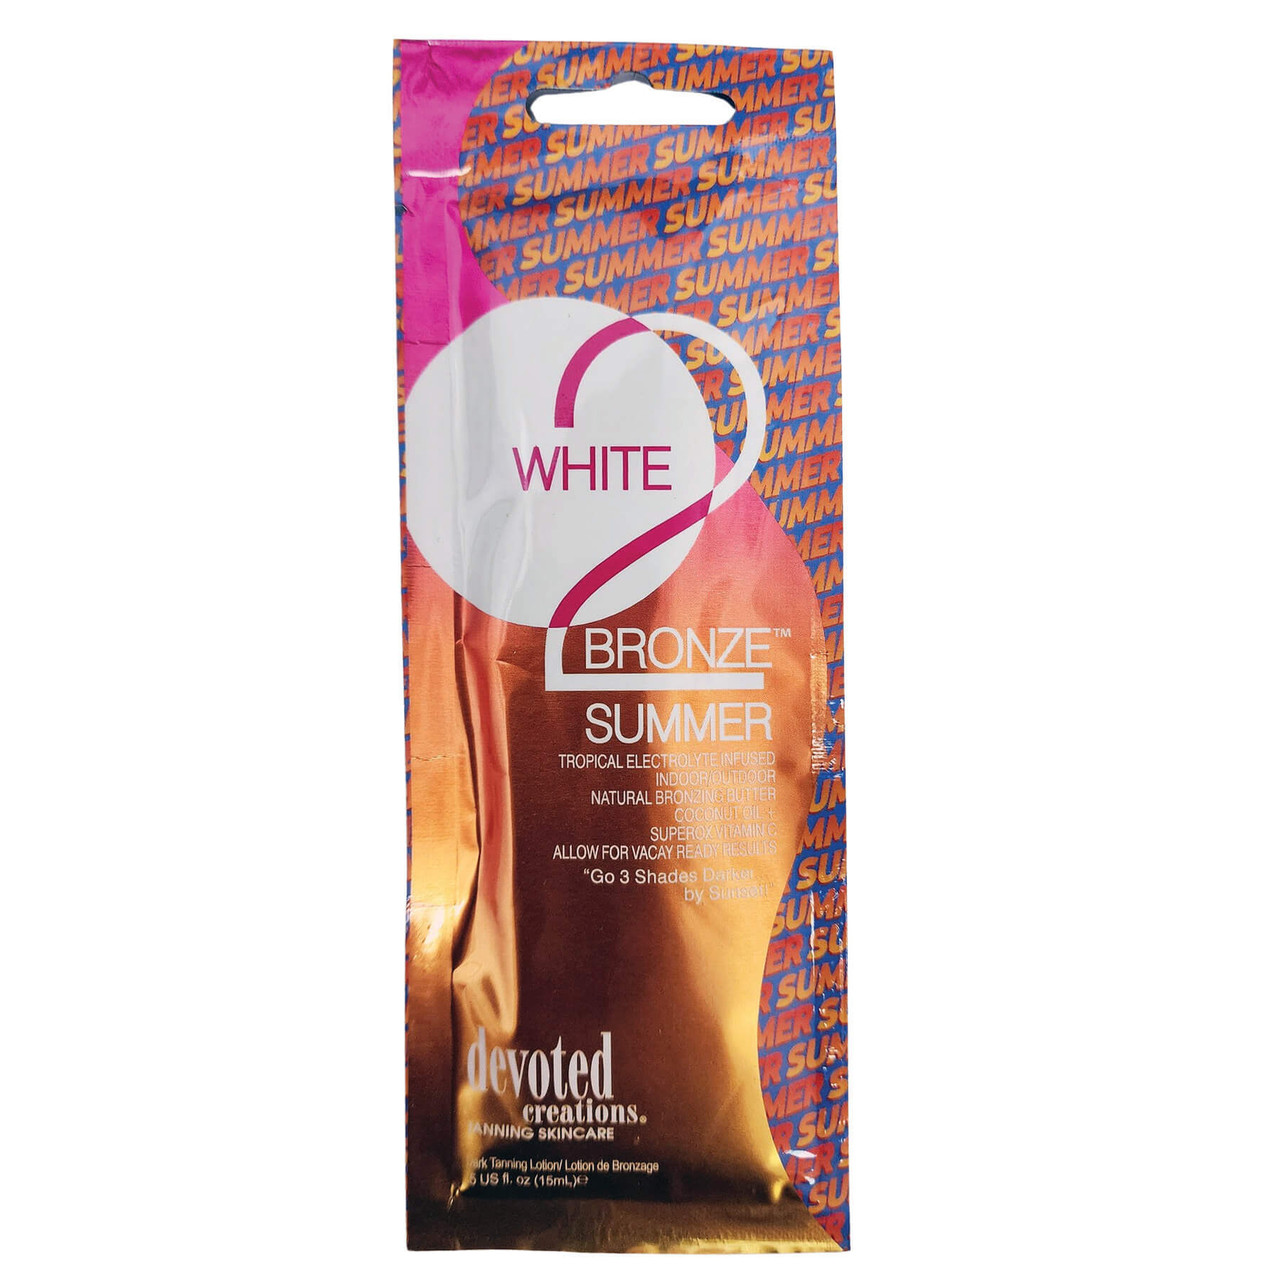 Devoted Creations White 2 Bronze Summer - .50 oz. Packet